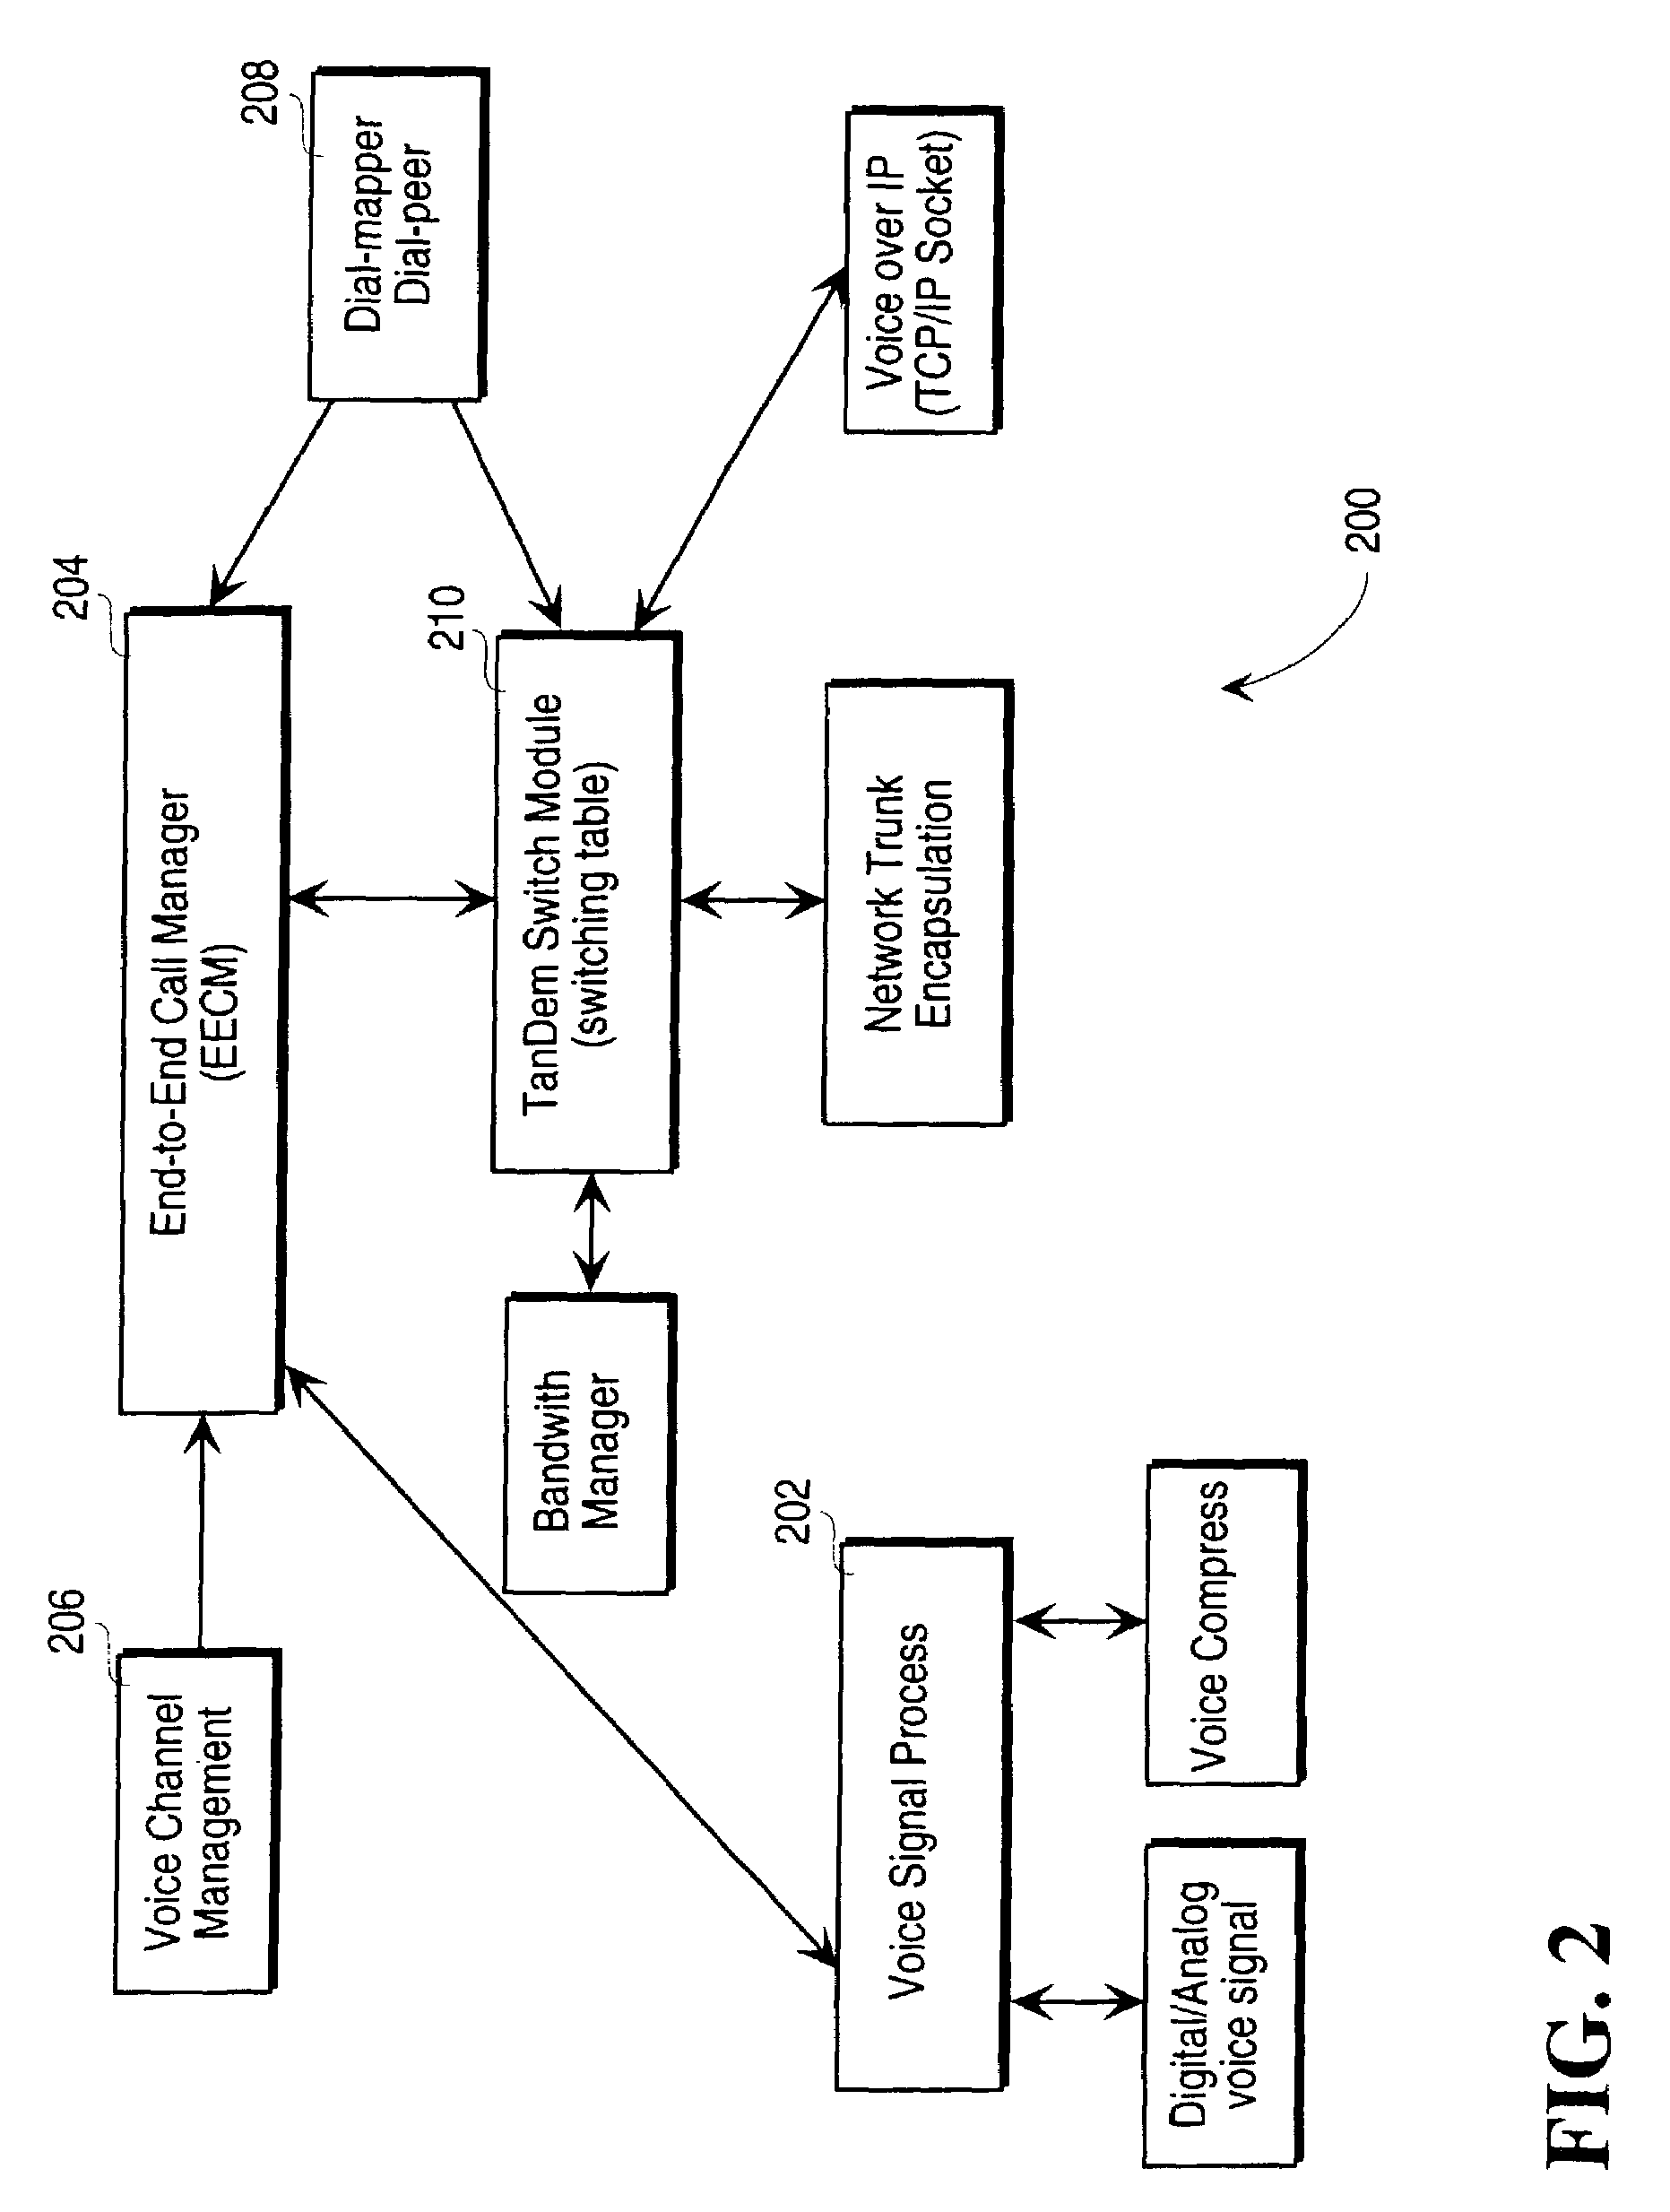 Method and apparatus for controlling the transmission of cells across a network